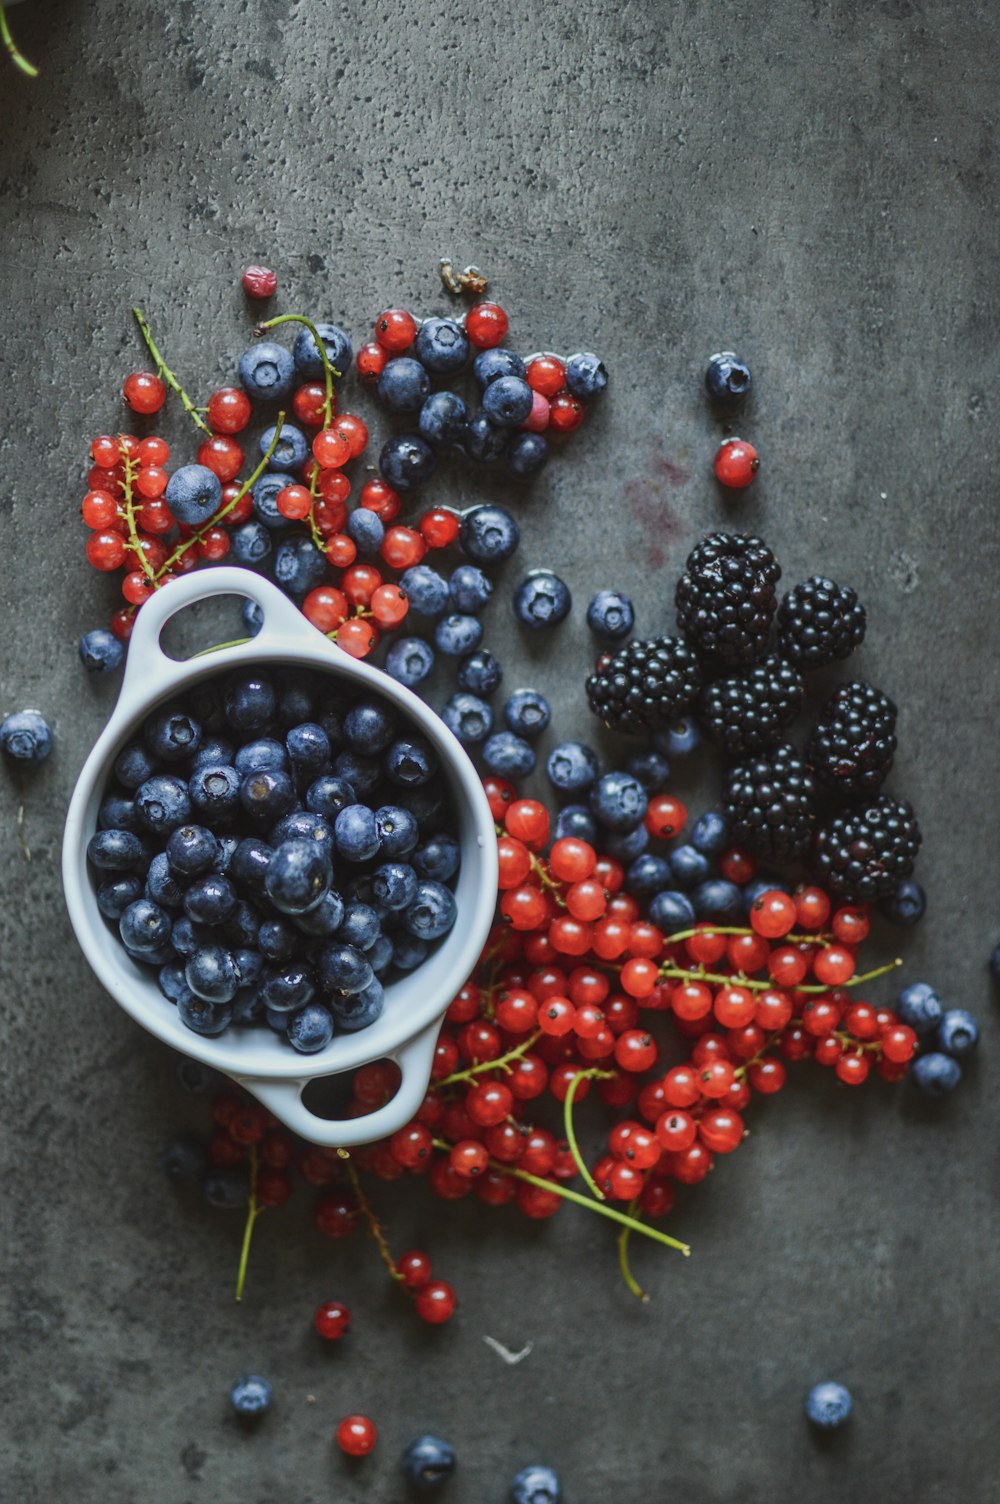 round red and blue berries beside bowl